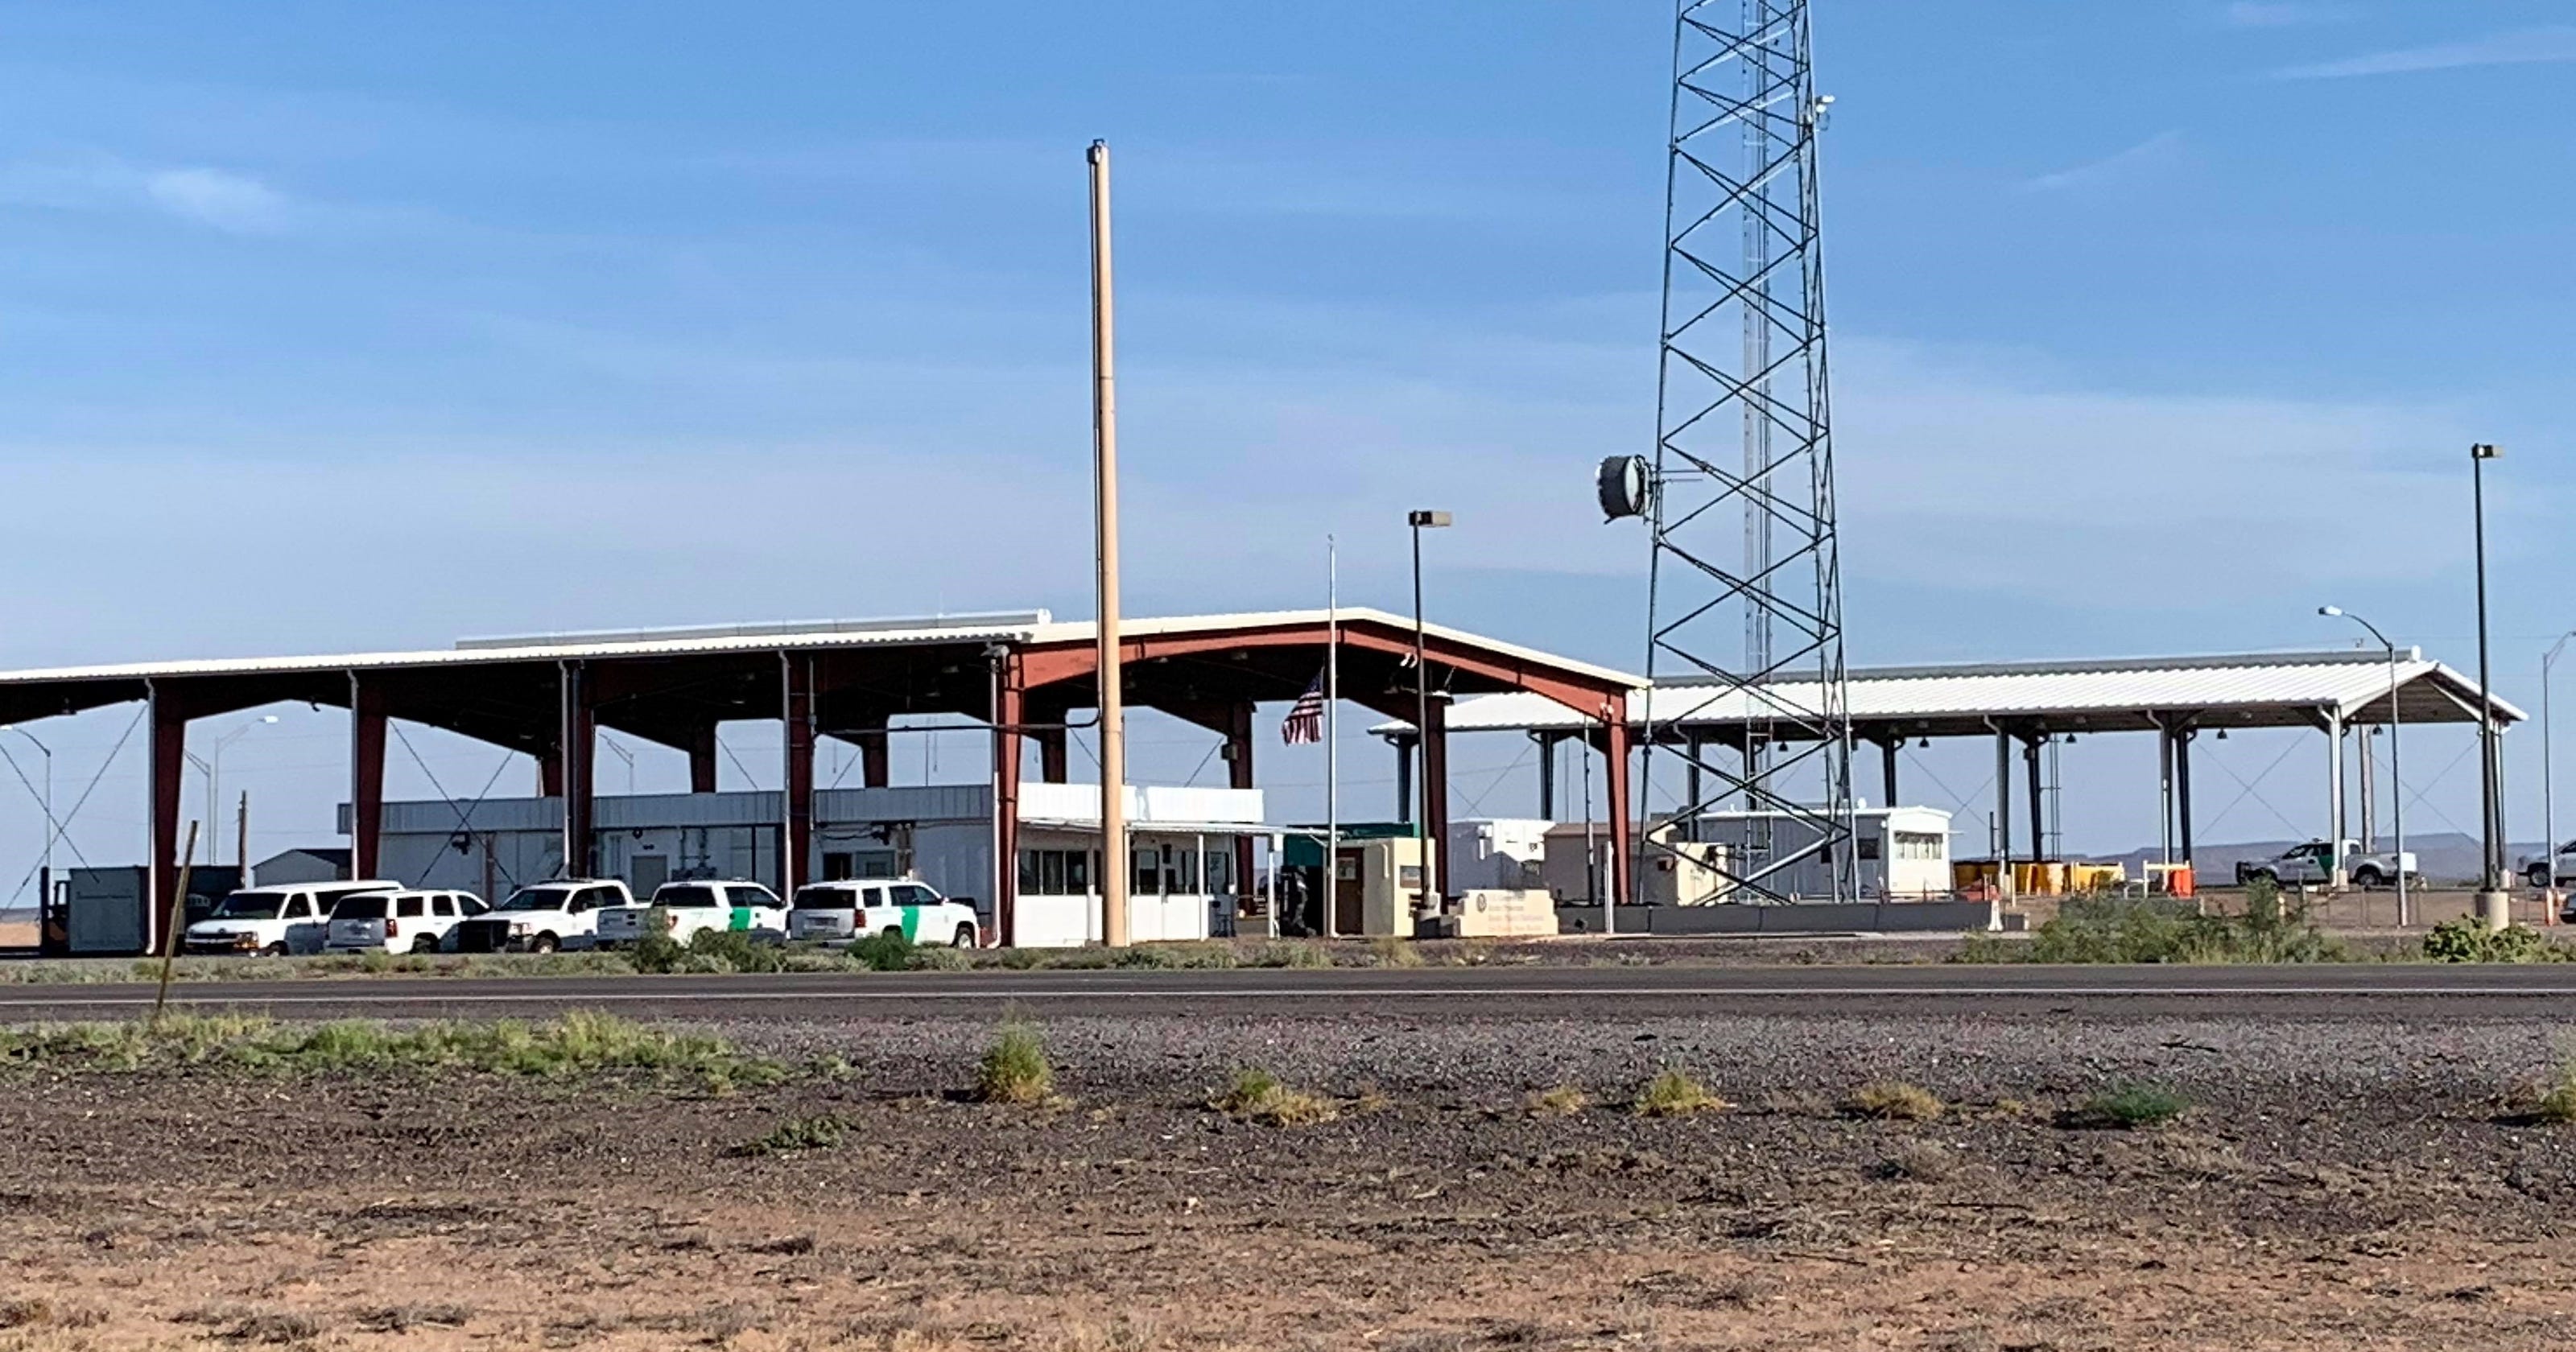  Border  Patrol checkpoints  reopen in New Mexico